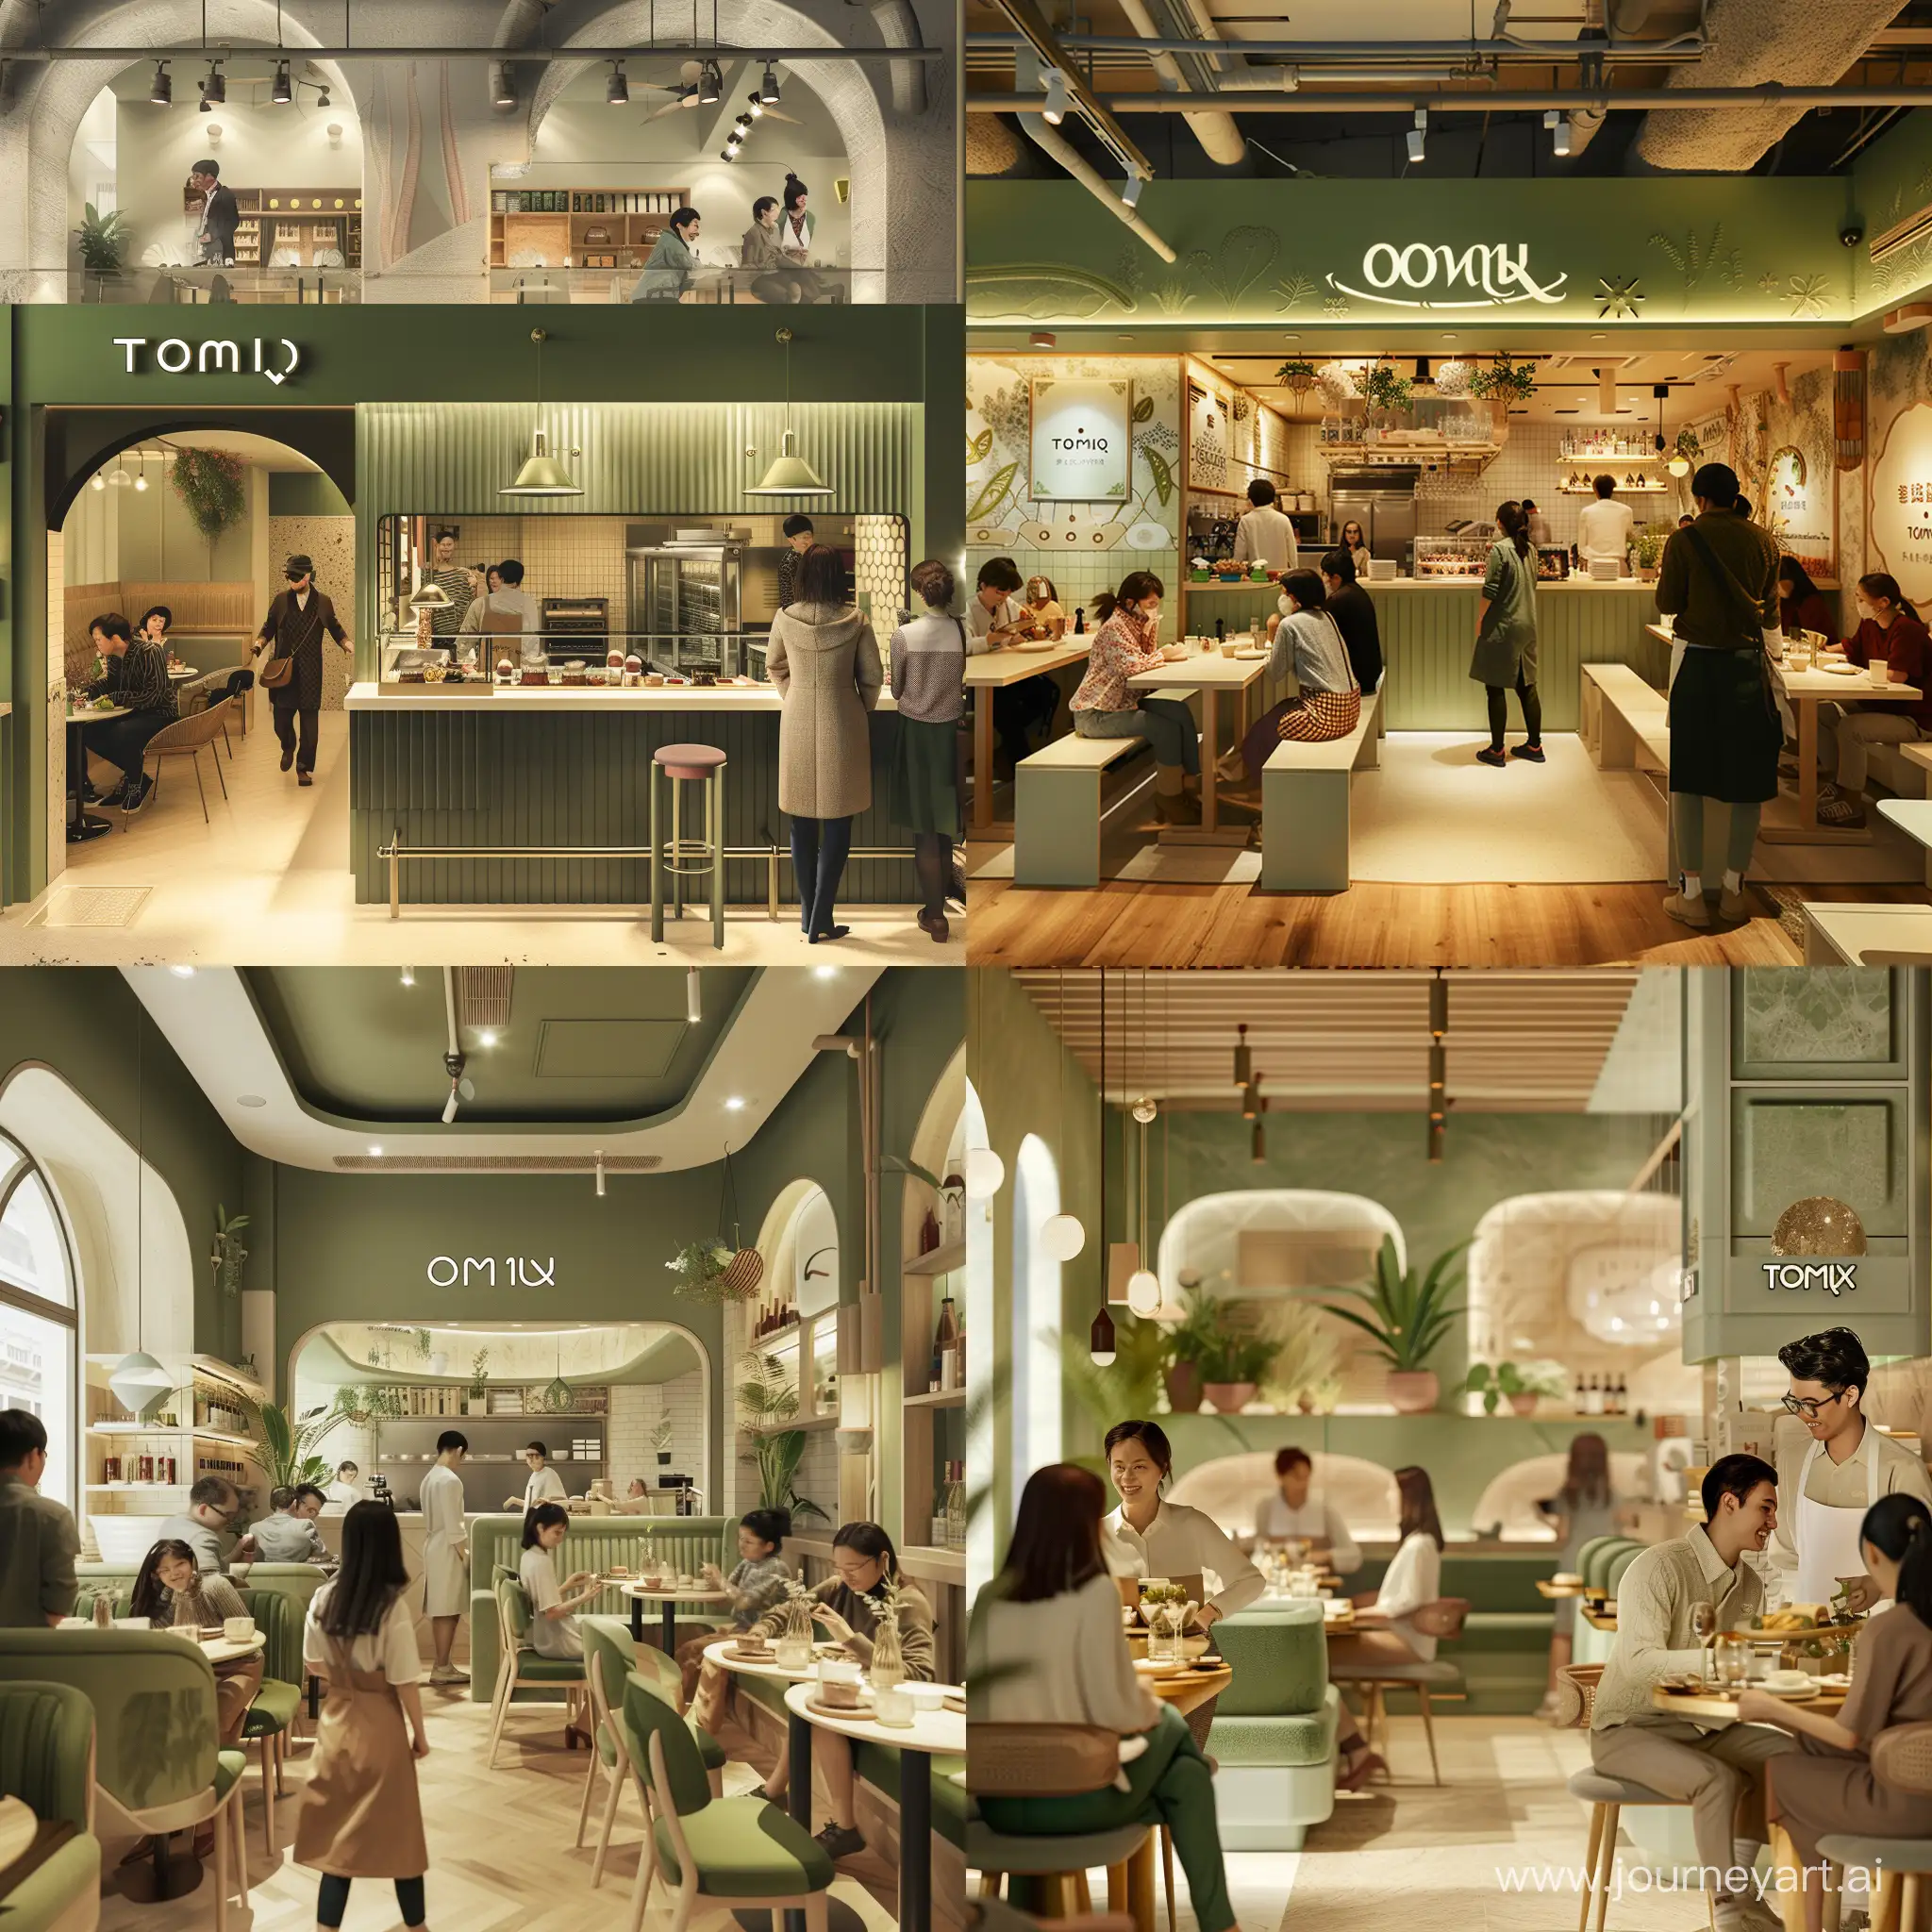  "Create an image of a restaurant named TOMIQ. The restaurant will have a cool tone with green and cream colors. Inside the restaurant, there will be a cozy atmosphere filled with customers and staff."